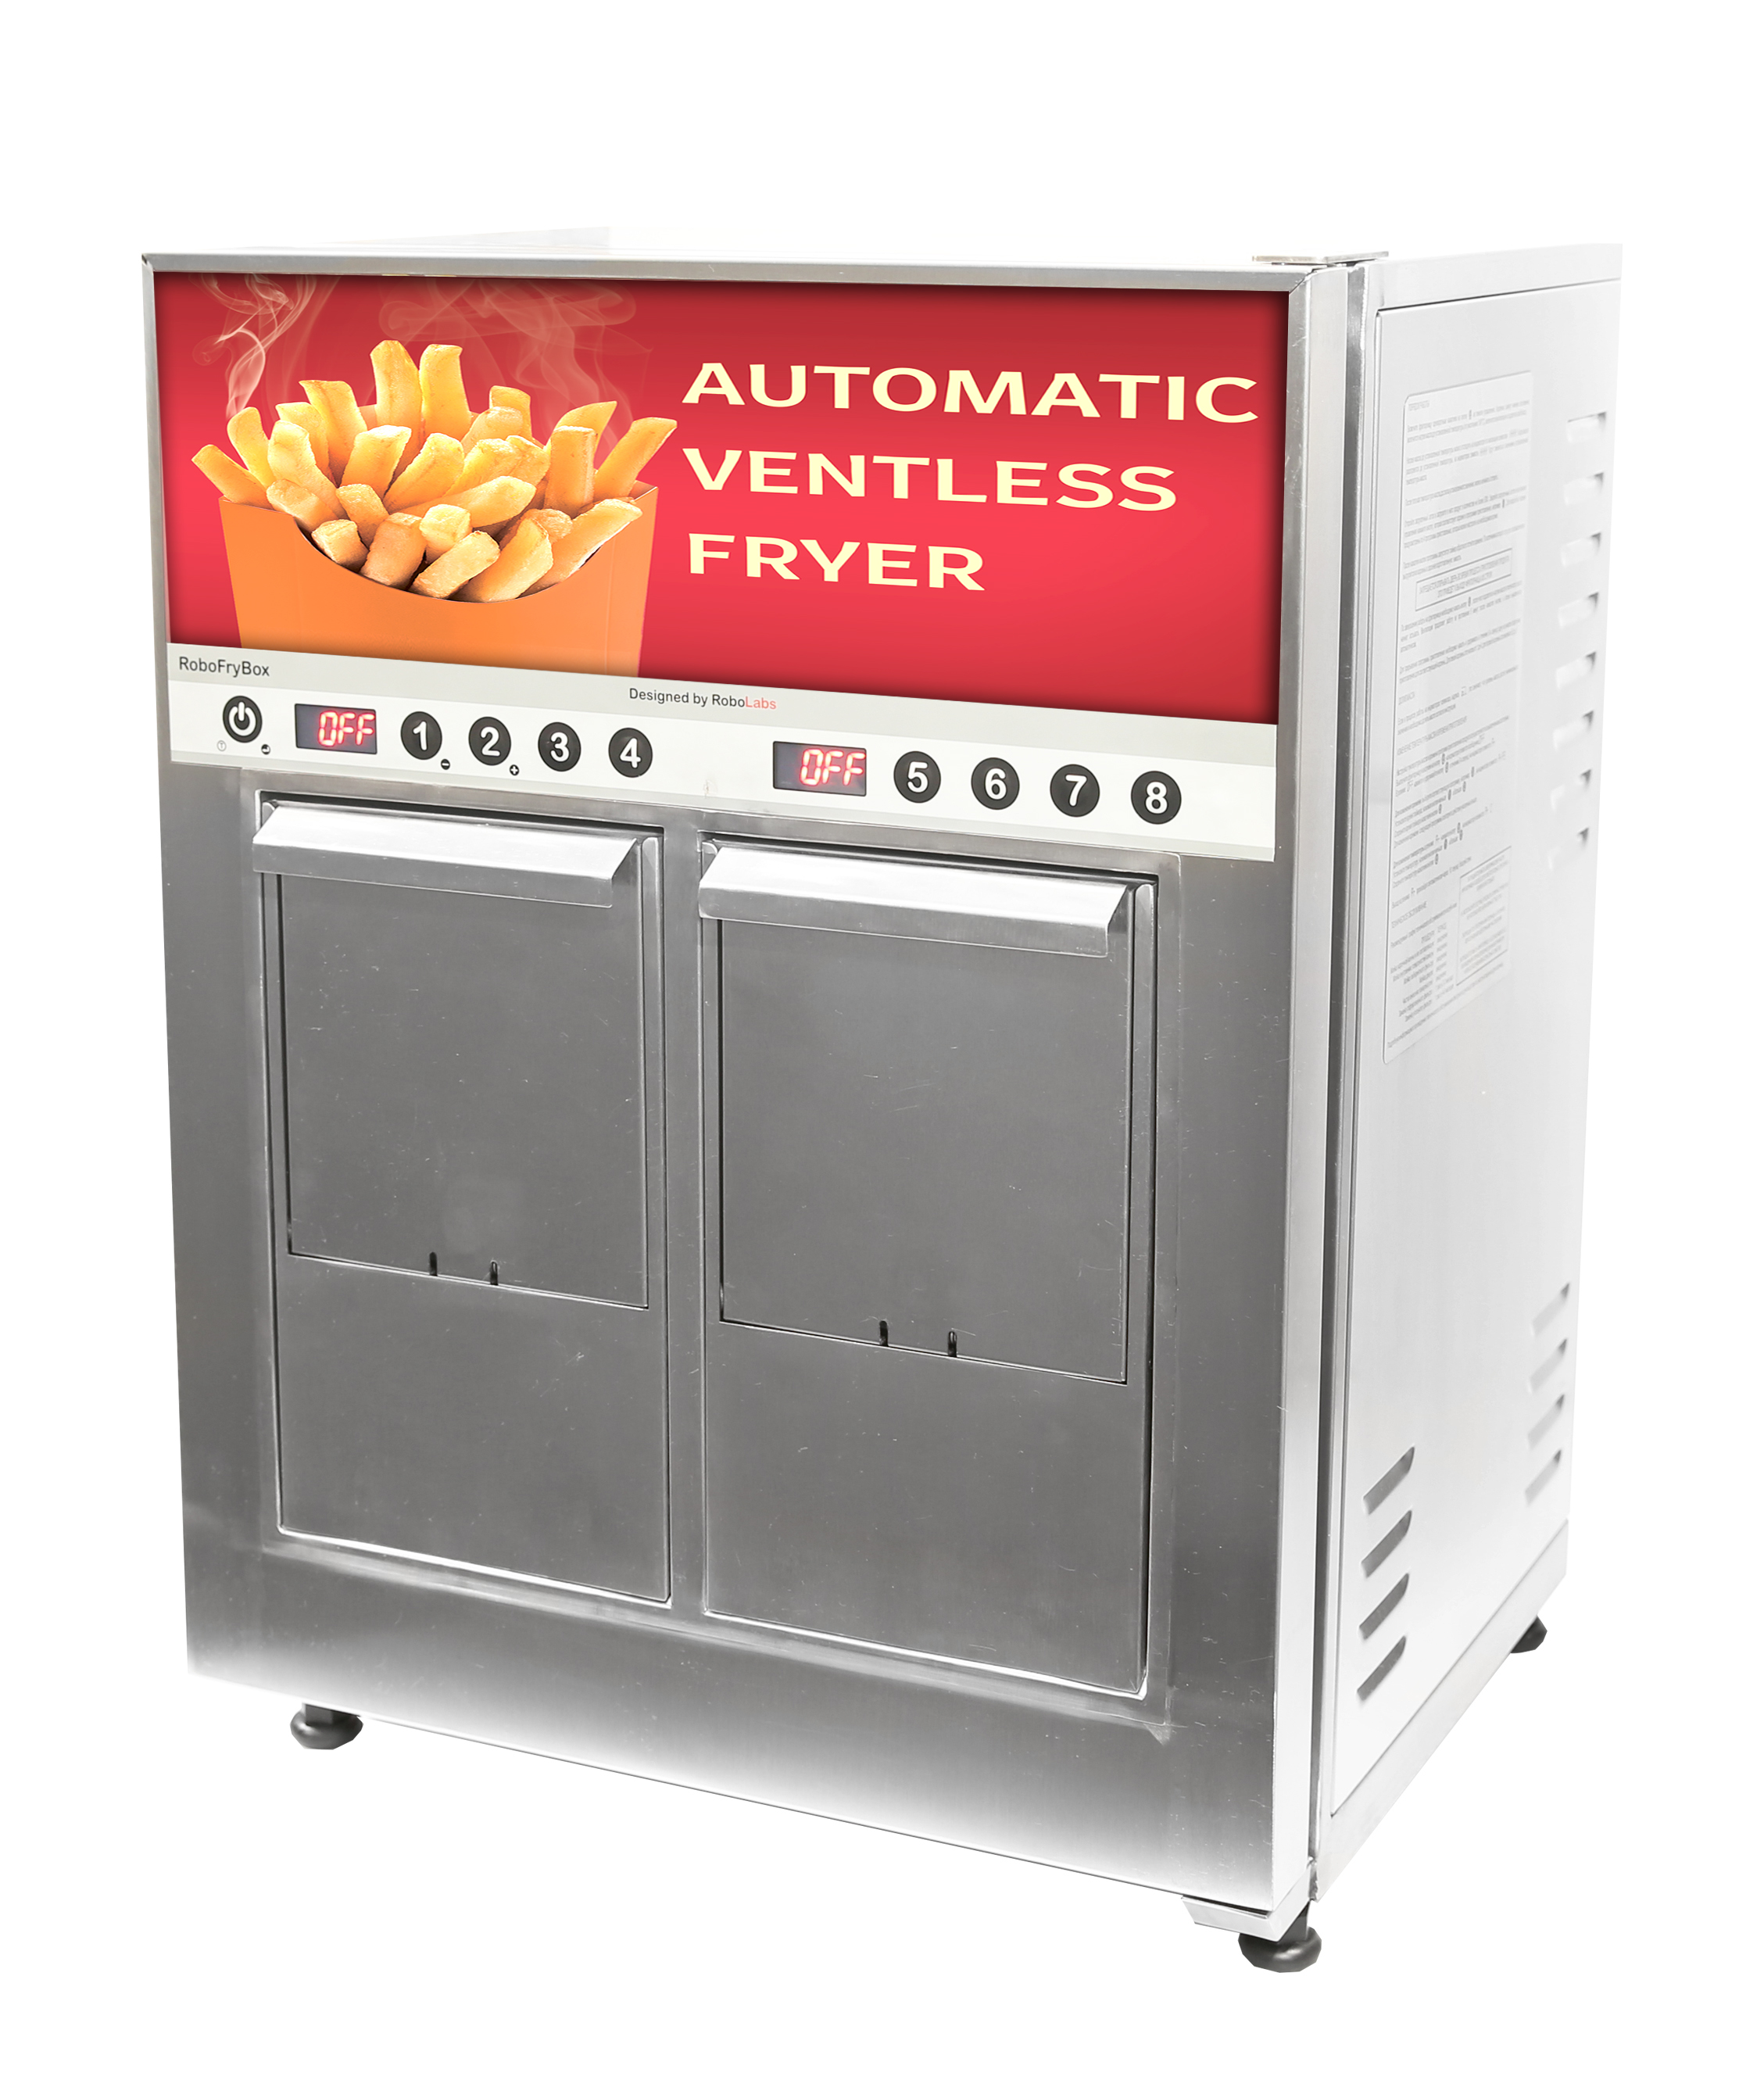 Table-top Automatic Ventless Fryer RoboFryBox 